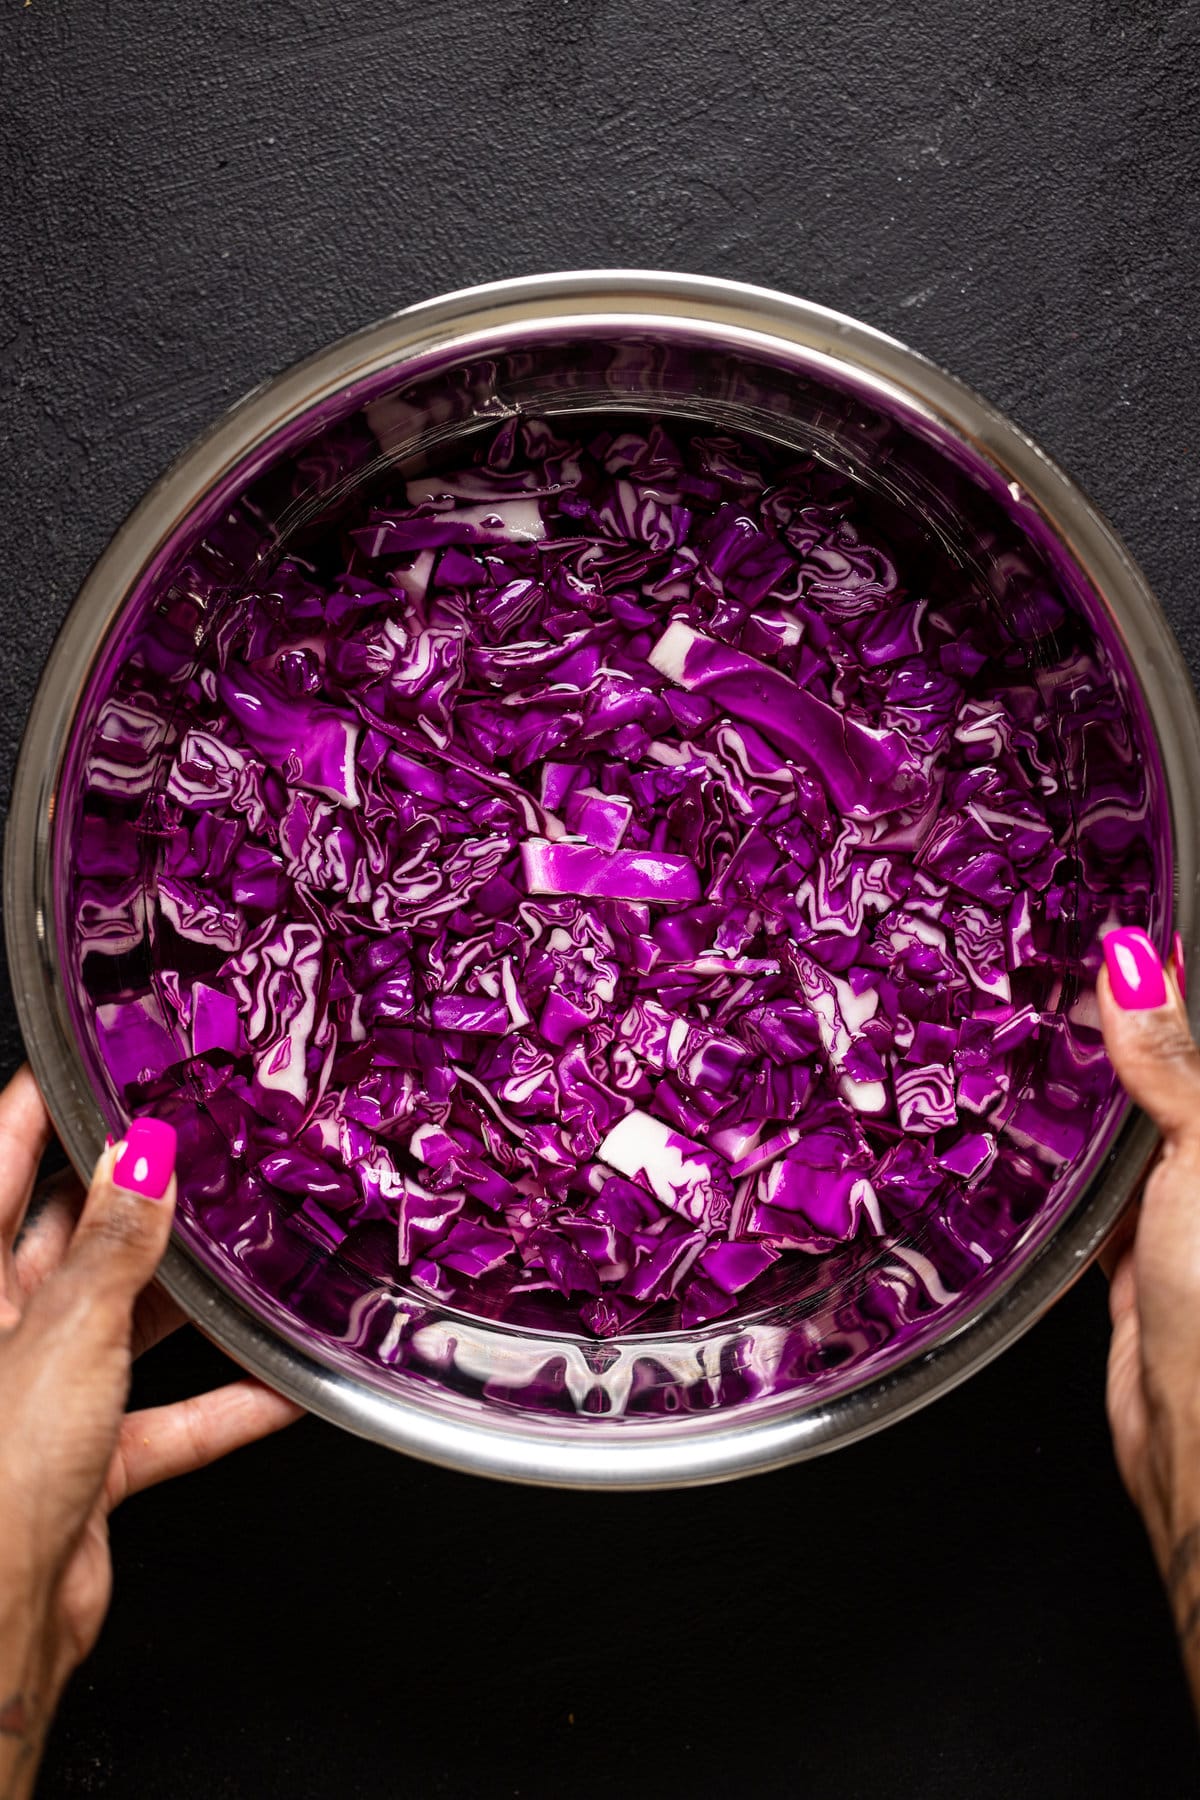 Bowl of shredded purple cabbage and water being held by two hands